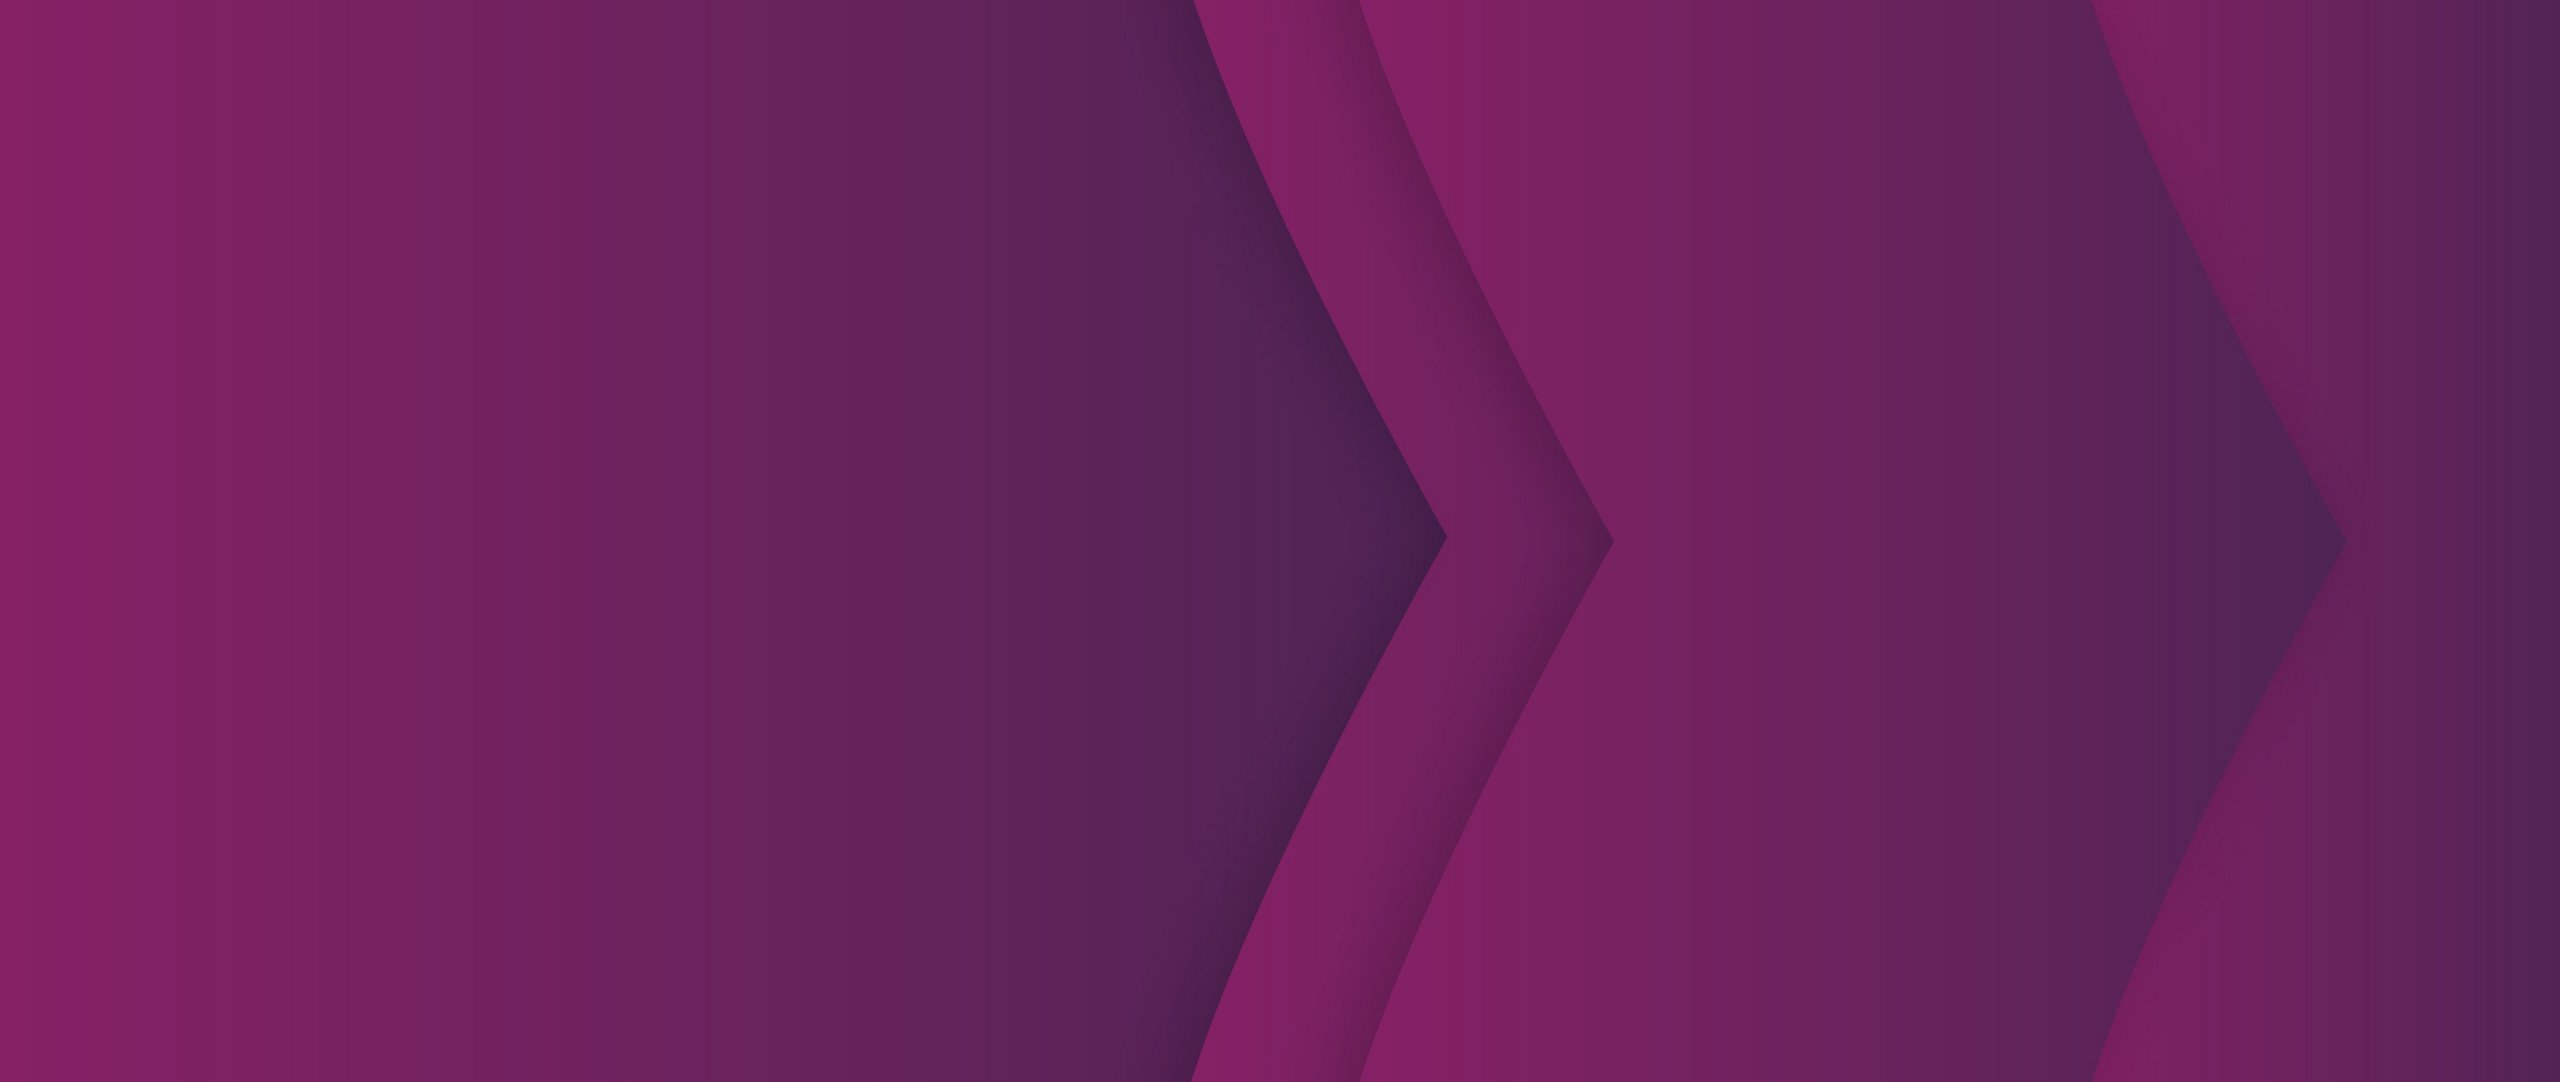 Skrill purple background with arrows